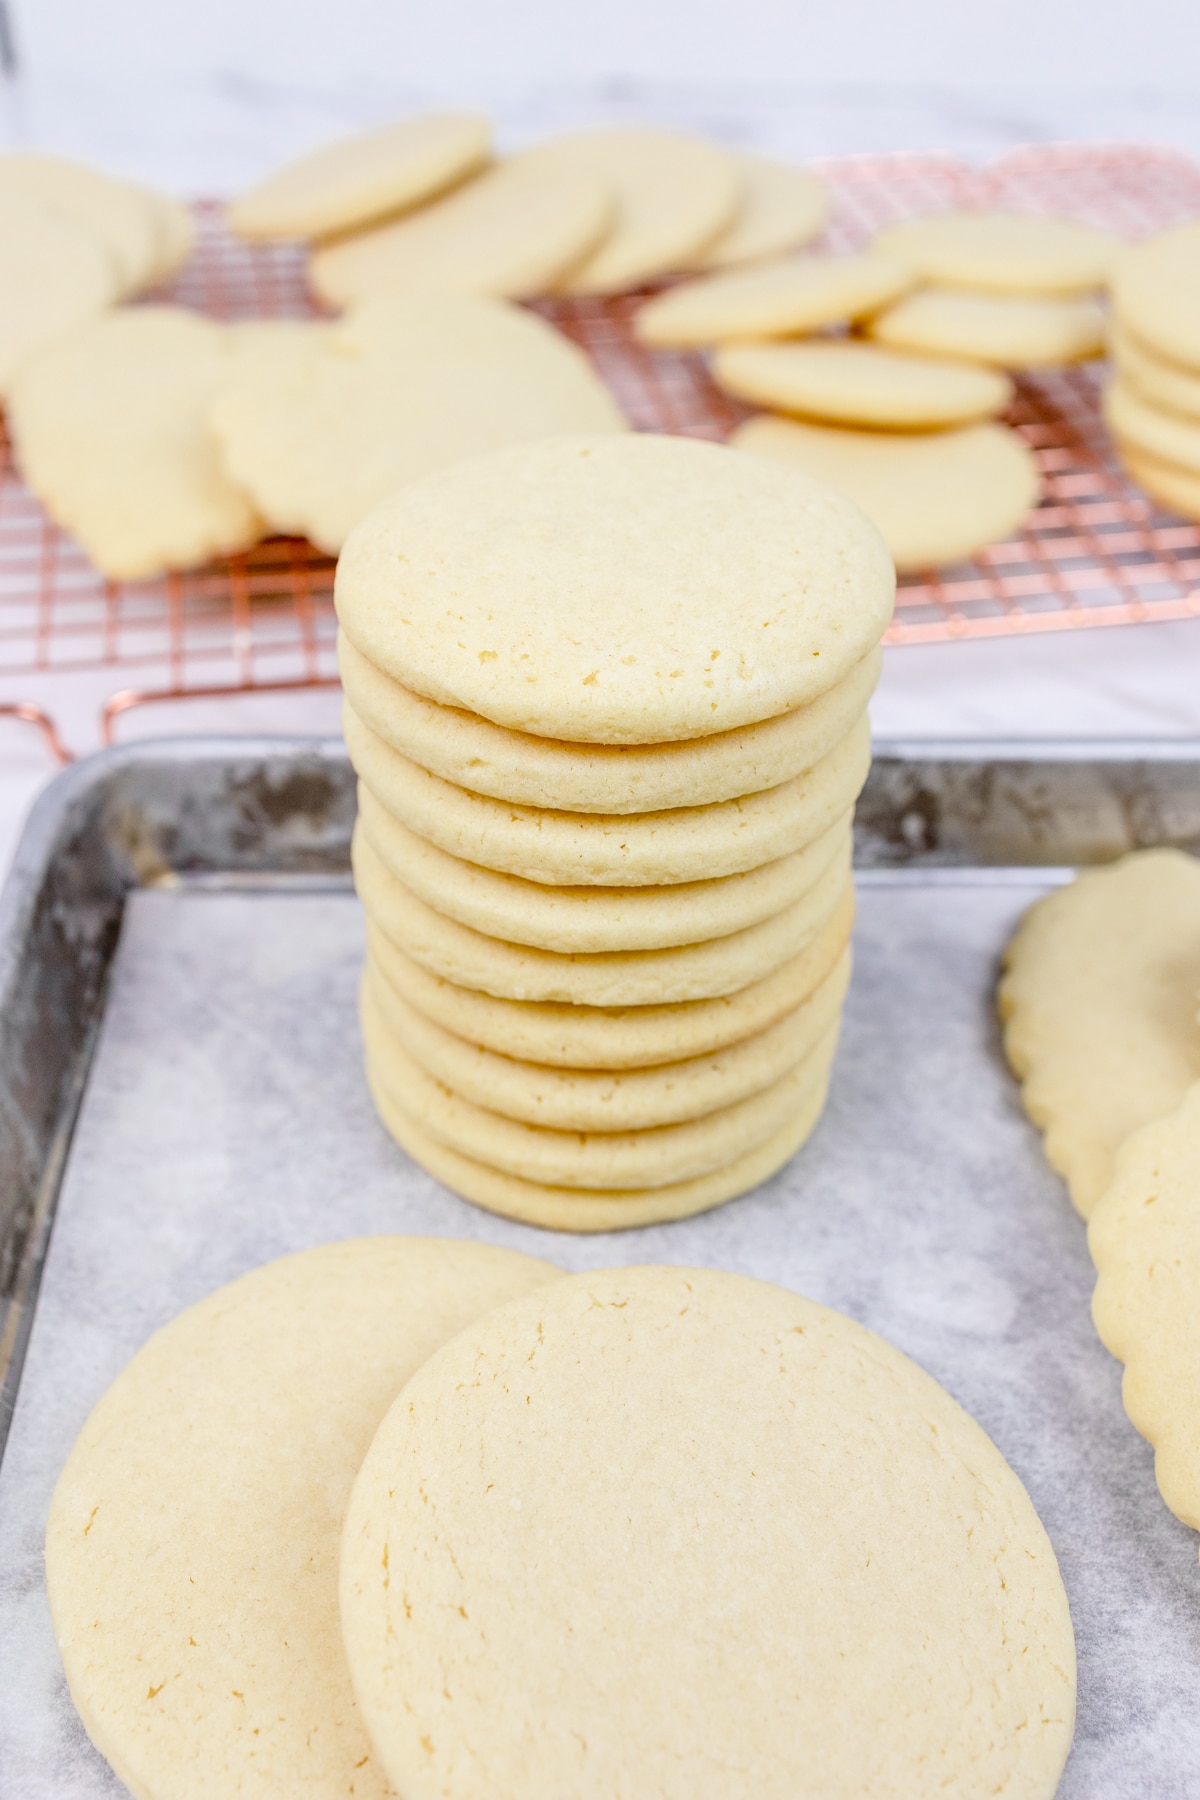 A stack of round sugar cookies on a baking tray.